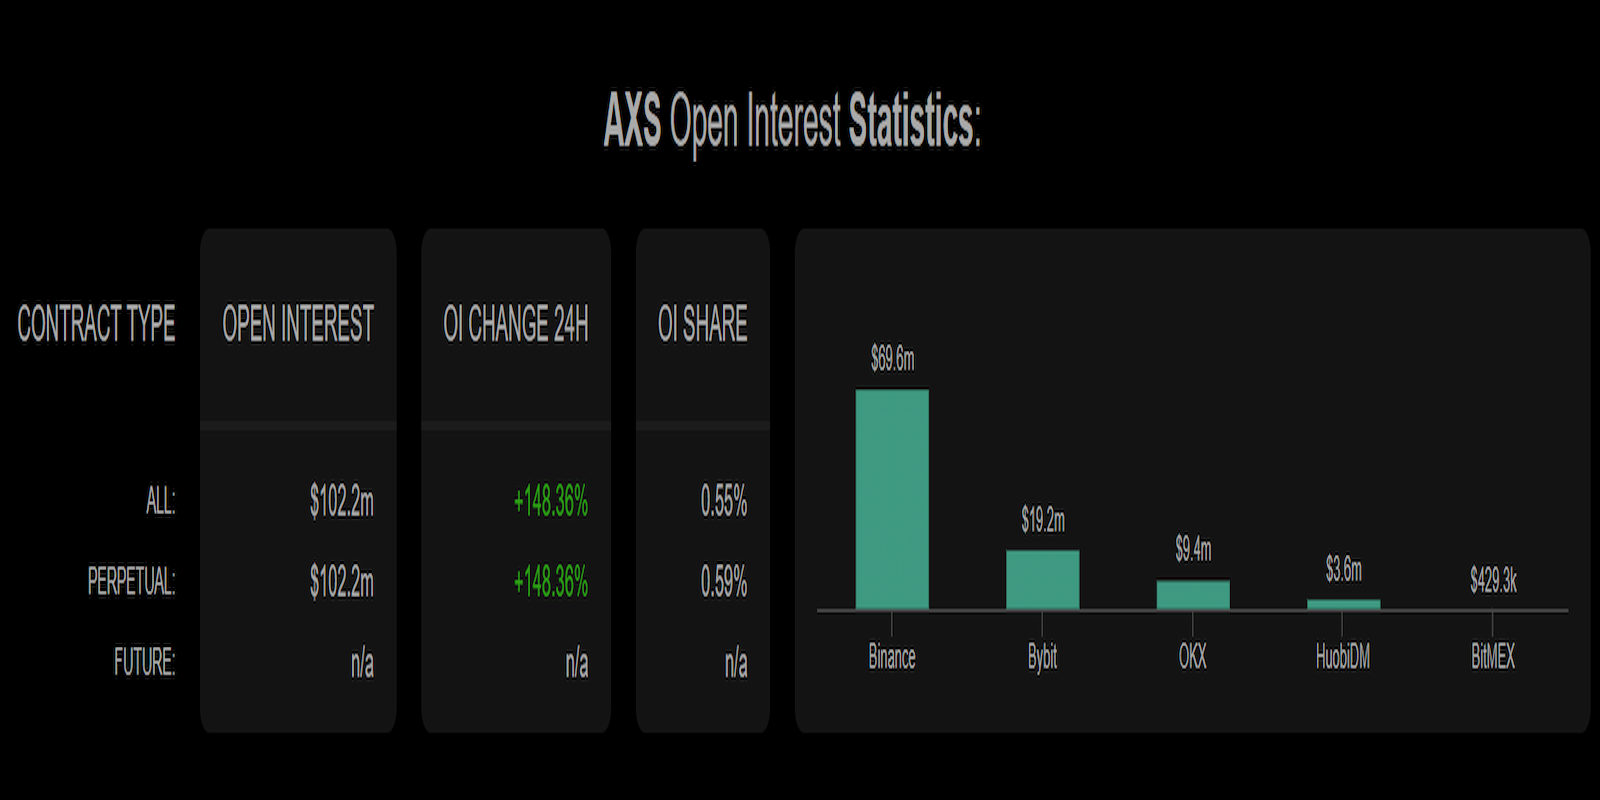 AXS open interests spiked 148% in 24 hours